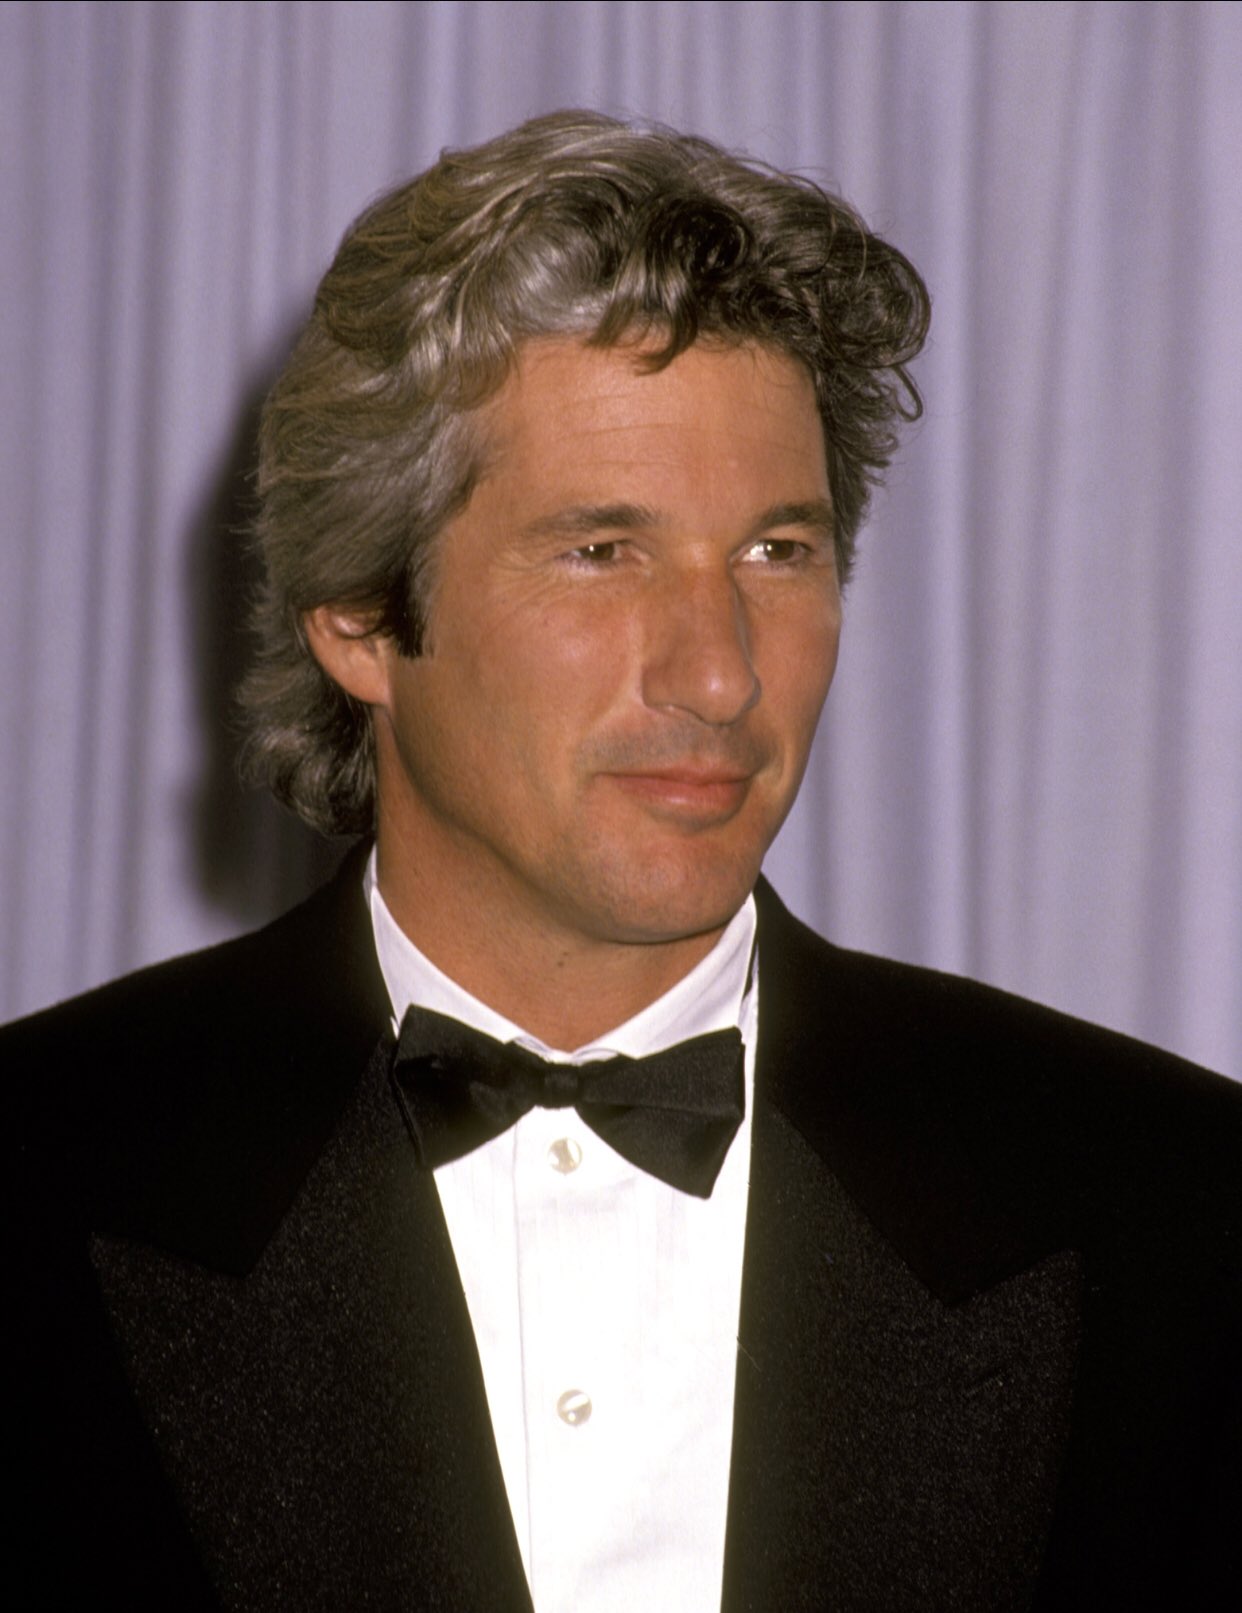 Wishing Richard Gere a happy 70th birthday! What is your favorite role? 